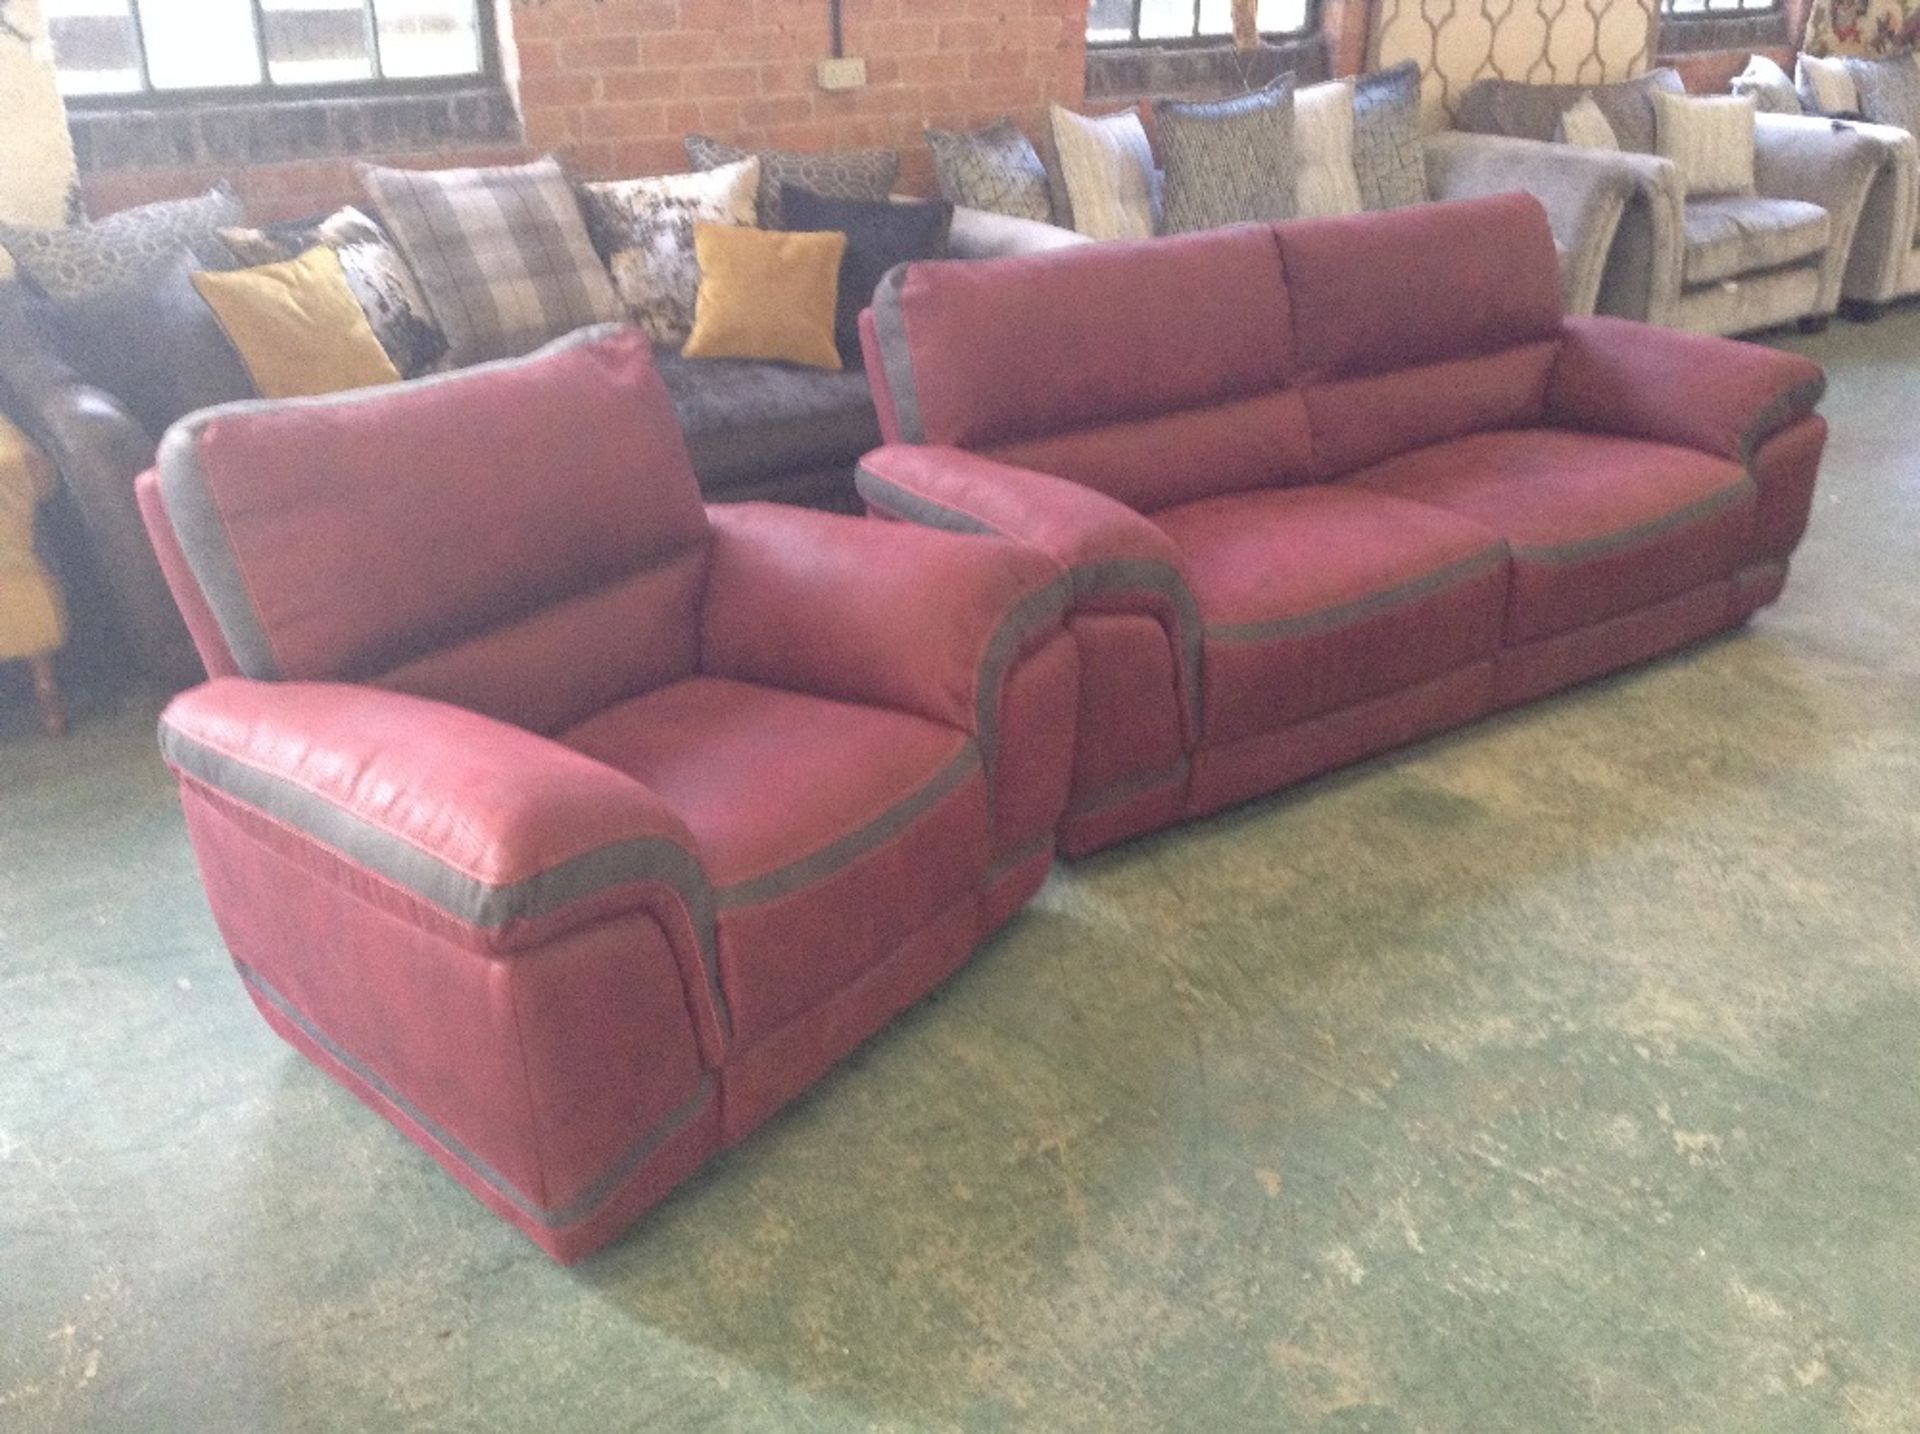 RED AND BROWN SADDLE 3 SEATER SOFA AND CHAIR(WM59